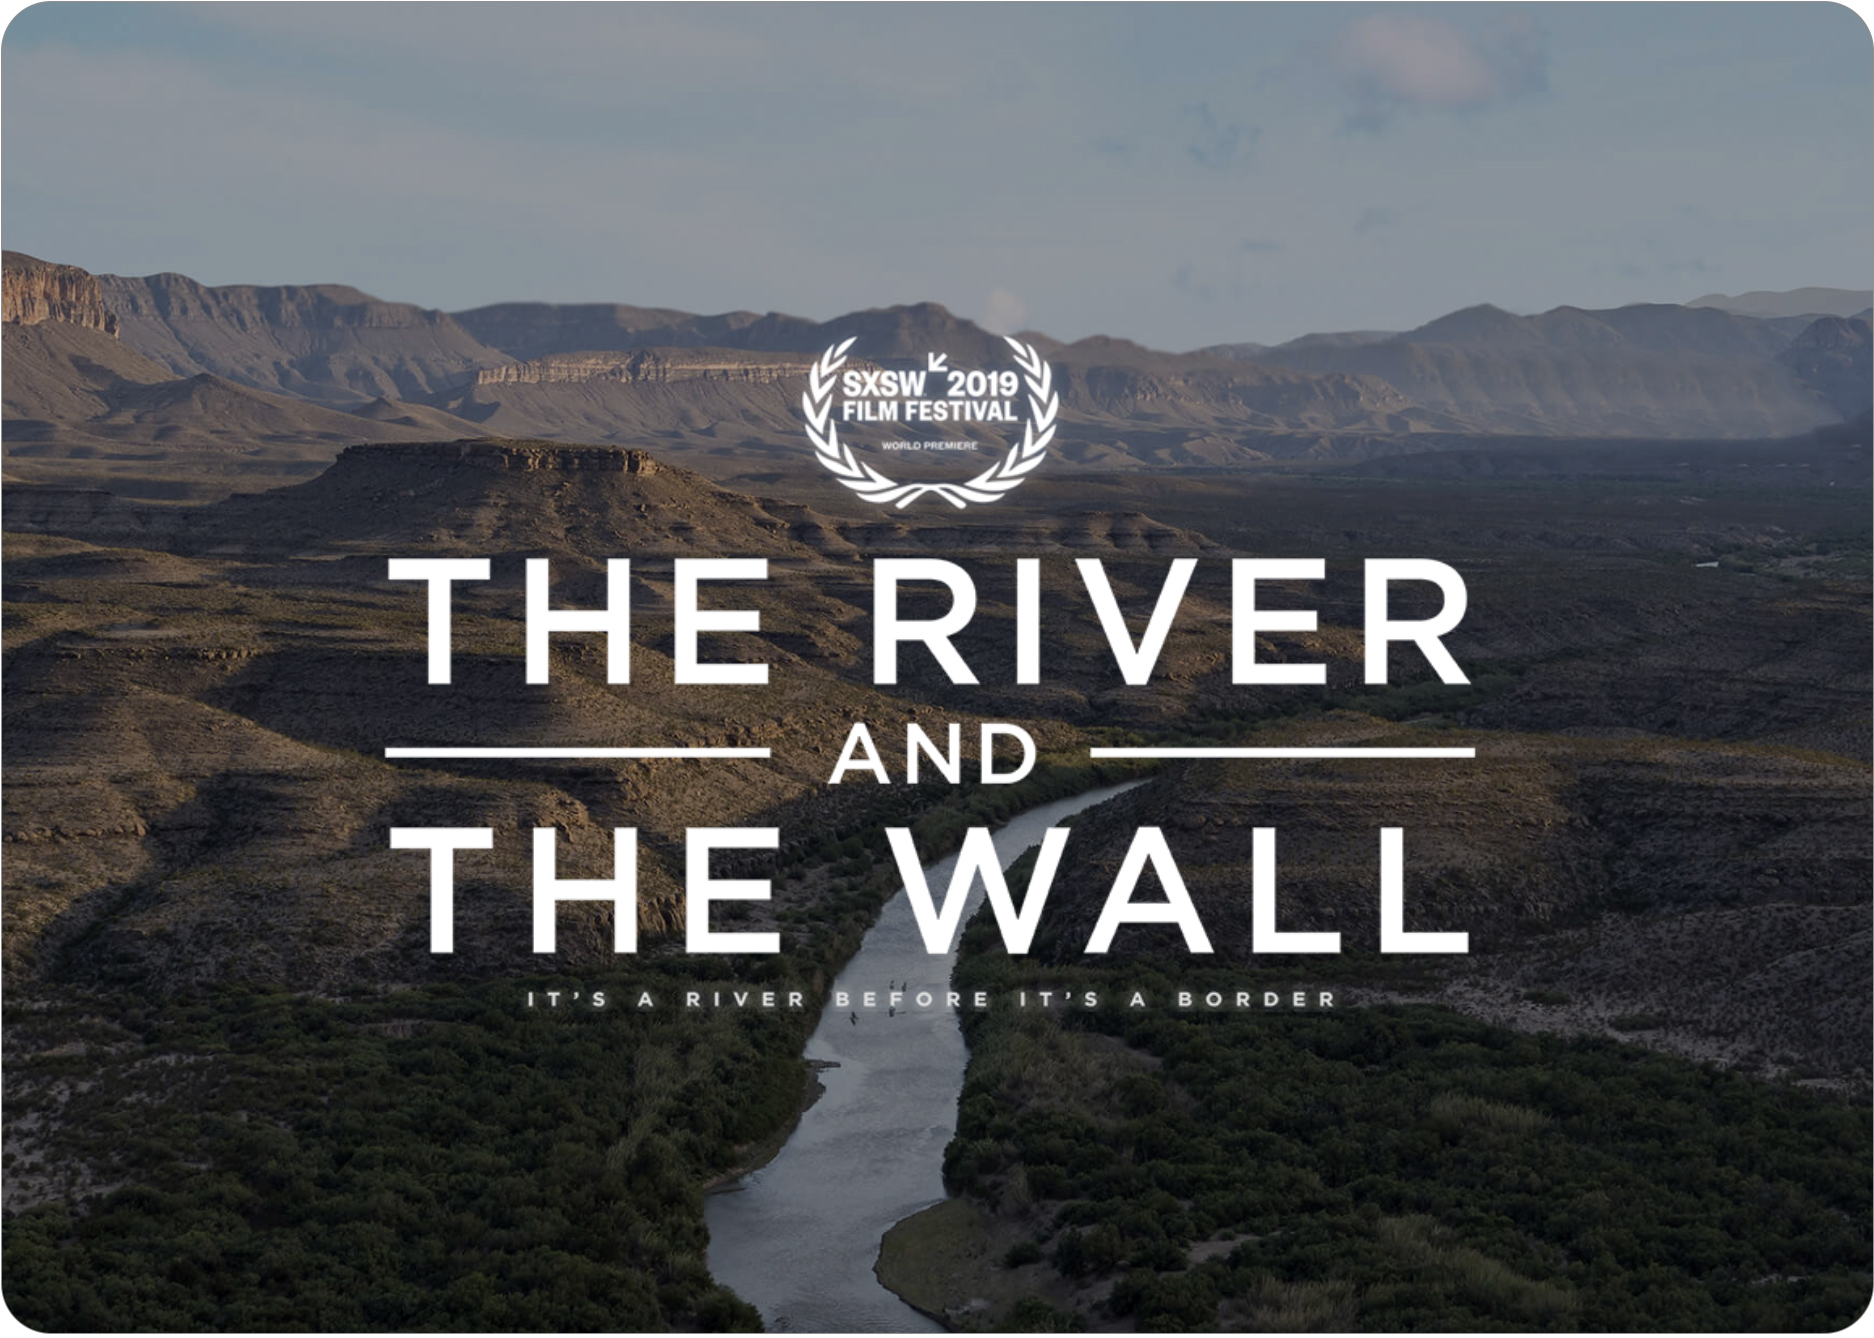 The River and The Wall